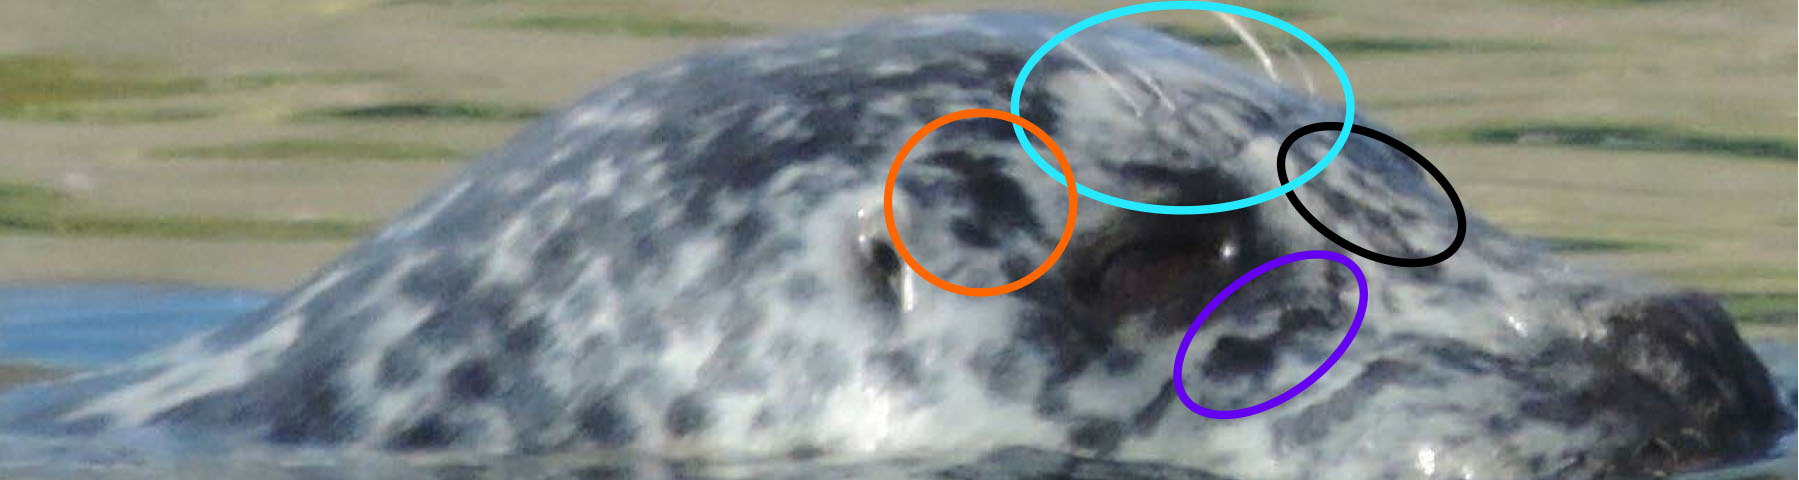 The head of a harbor seal in the water facing right with various spotting patterns circled in different colors.